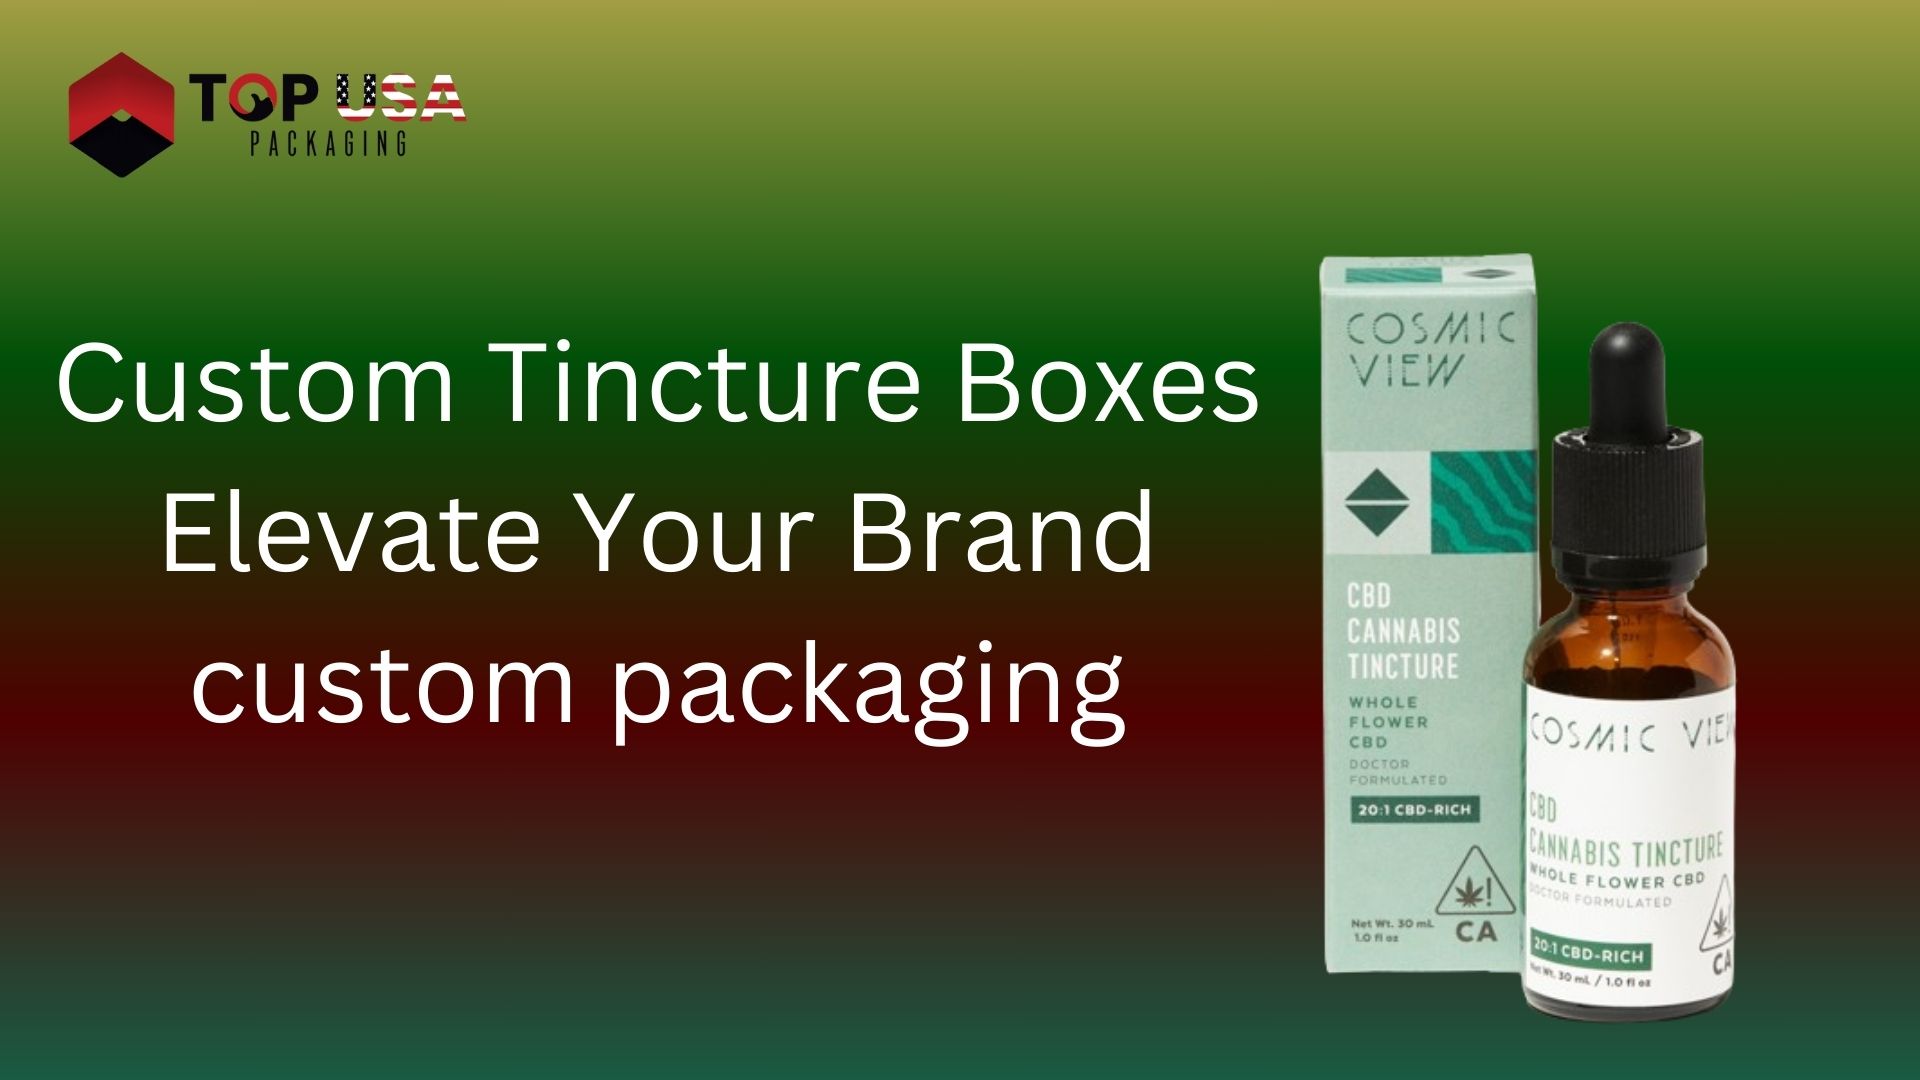 Custom Tincture Boxes Elevate Your Brand custom packaging